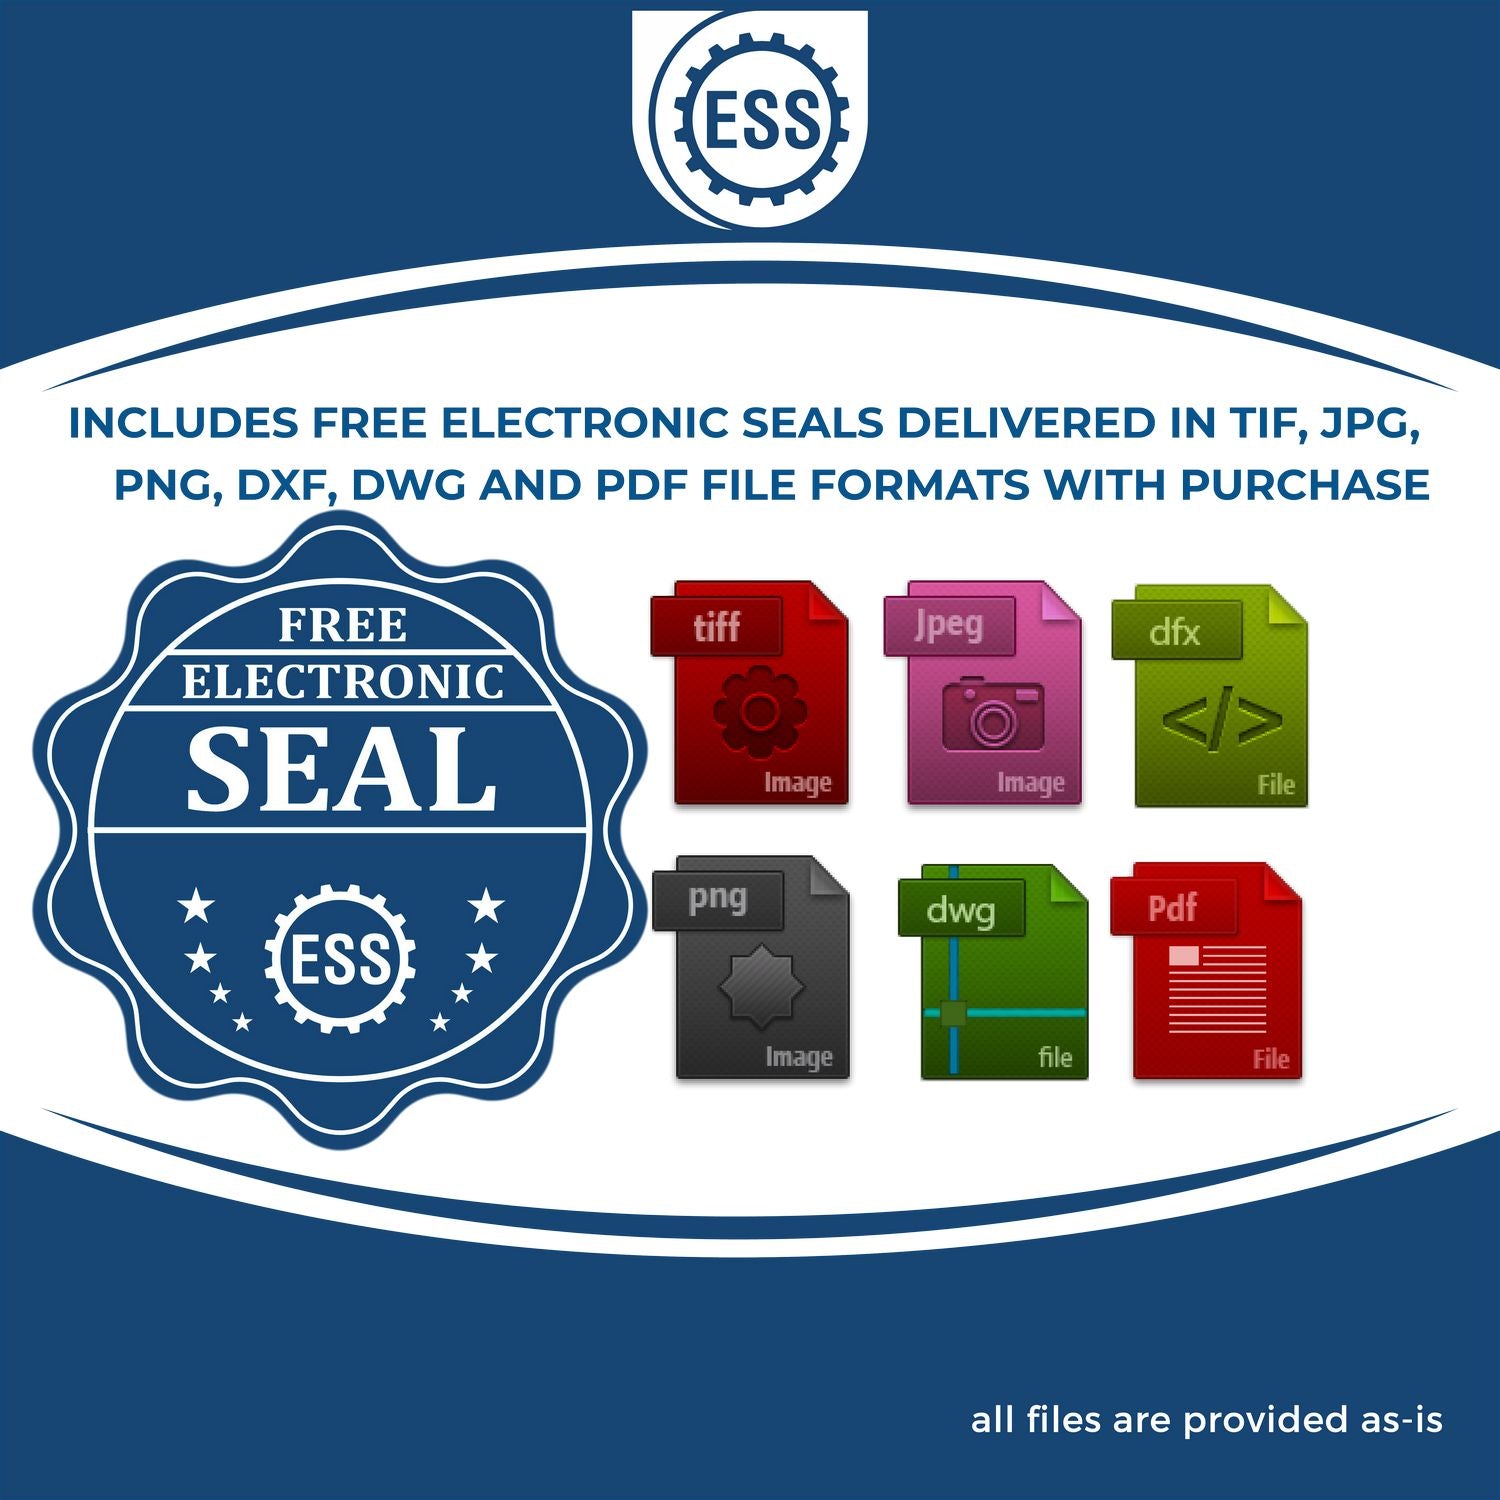 An infographic for the free electronic seal for the State of South Carolina Extended Long Reach Geologist Seal illustrating the different file type icons such as DXF, DWG, TIF, JPG and PNG.